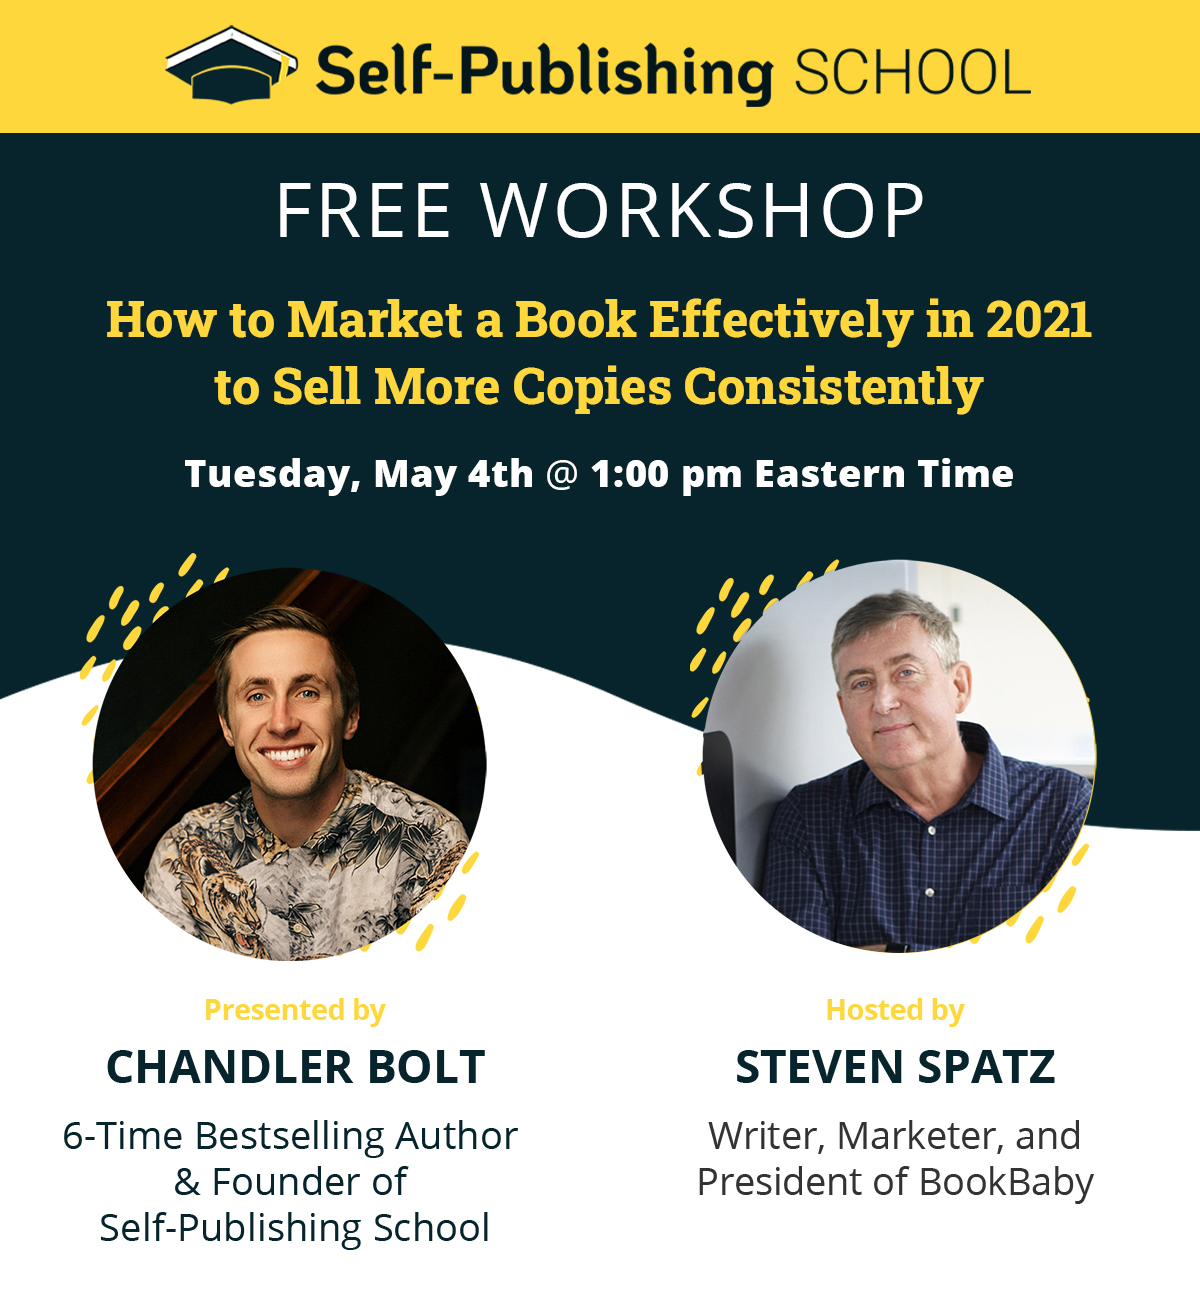 How to Market a Book Effectively in 2021 to Sell More Copies Consistently